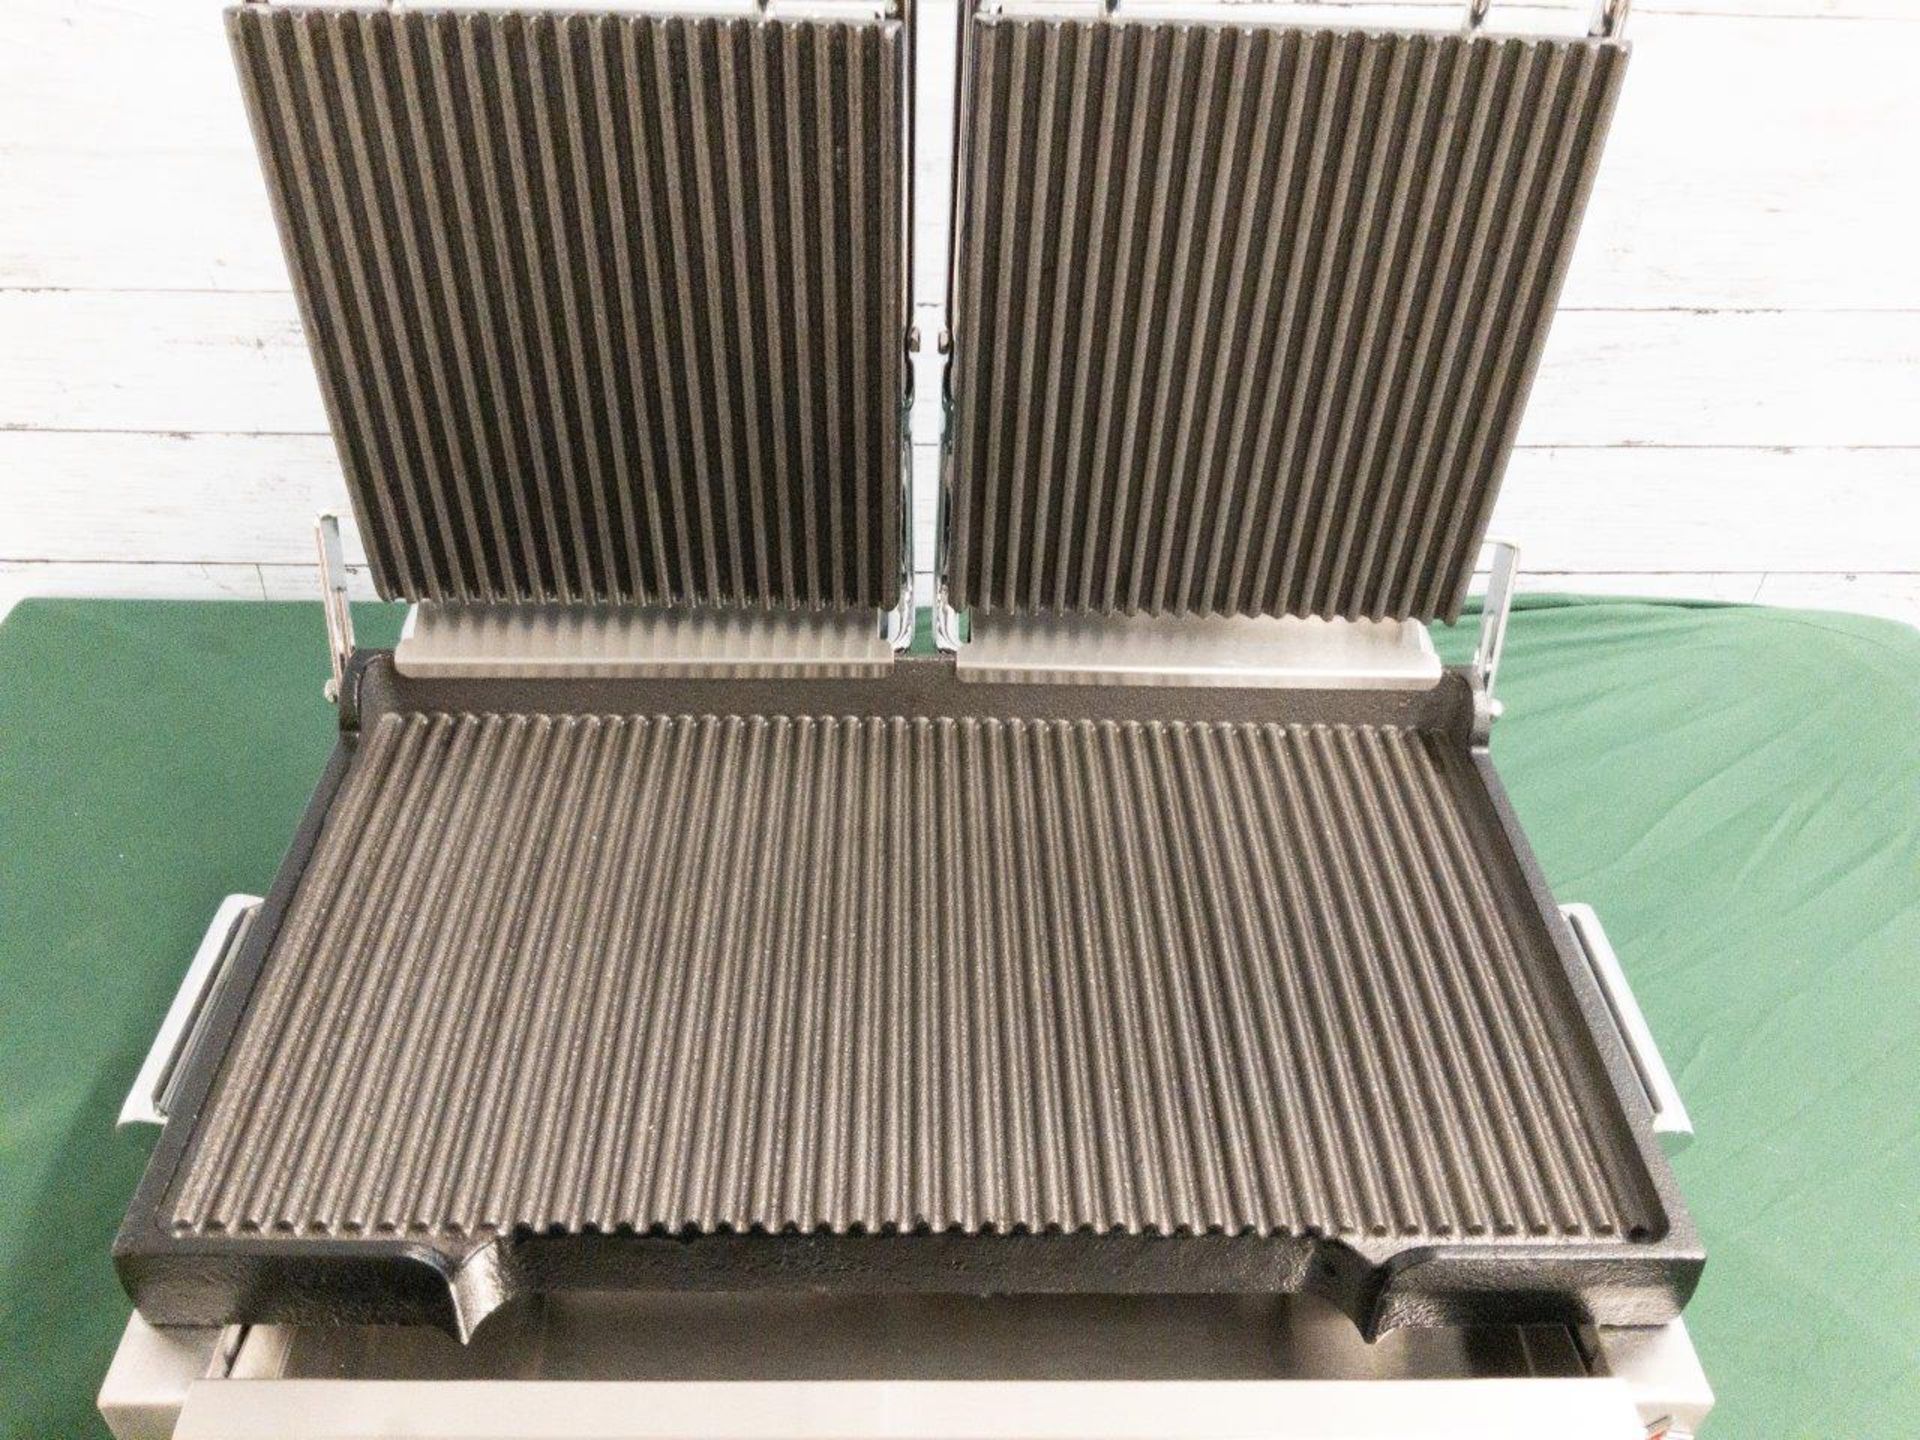 18" X 10" DOUBLE PANINI GRILL, OMCAN 19937 - Image 6 of 8